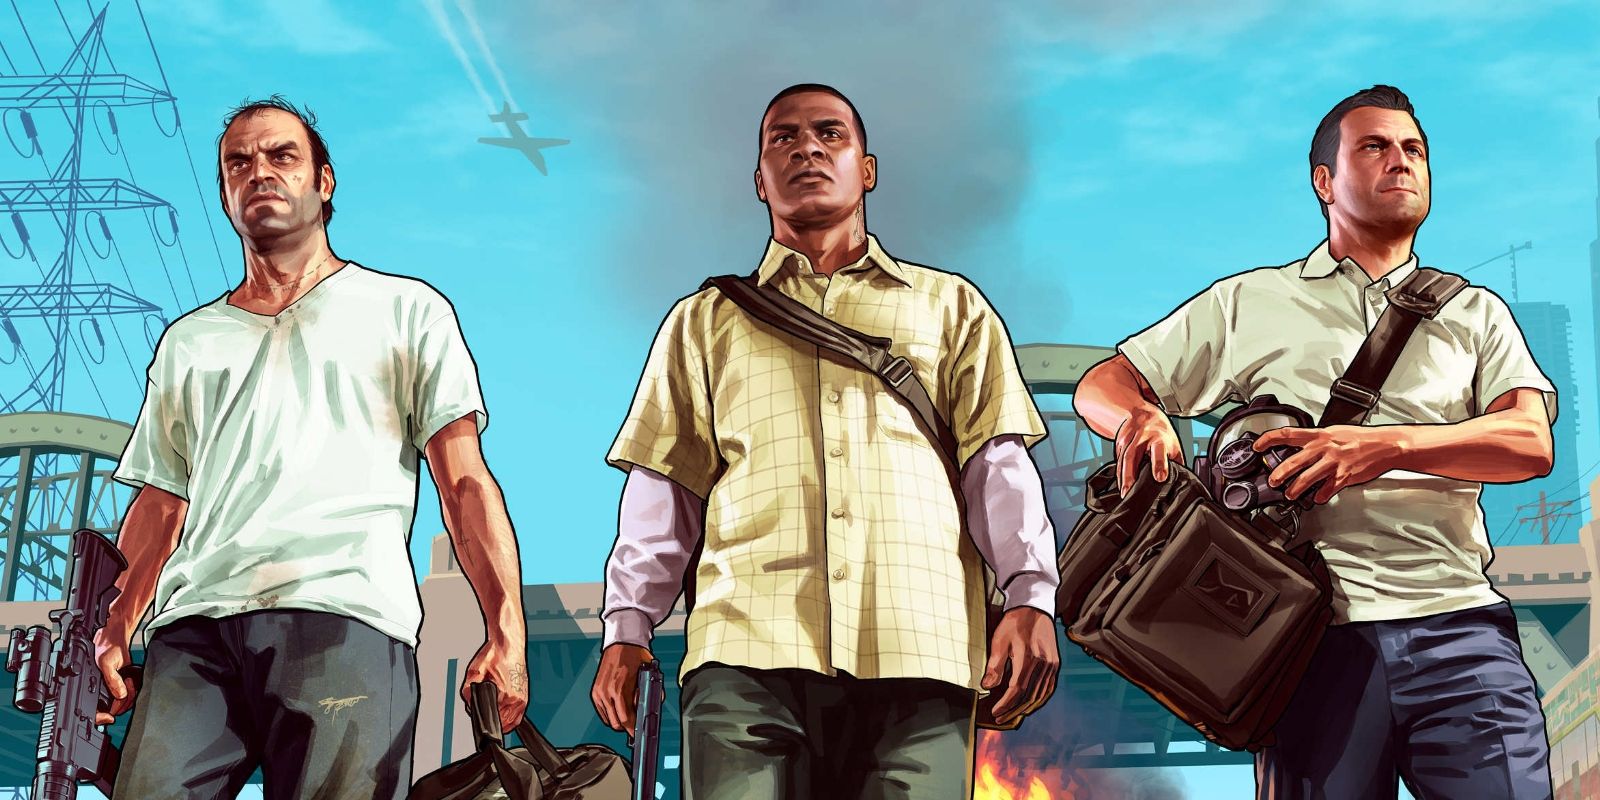 10 Best Talk Shows In Grand Theft Auto Ranked (& Who Hosted Them)